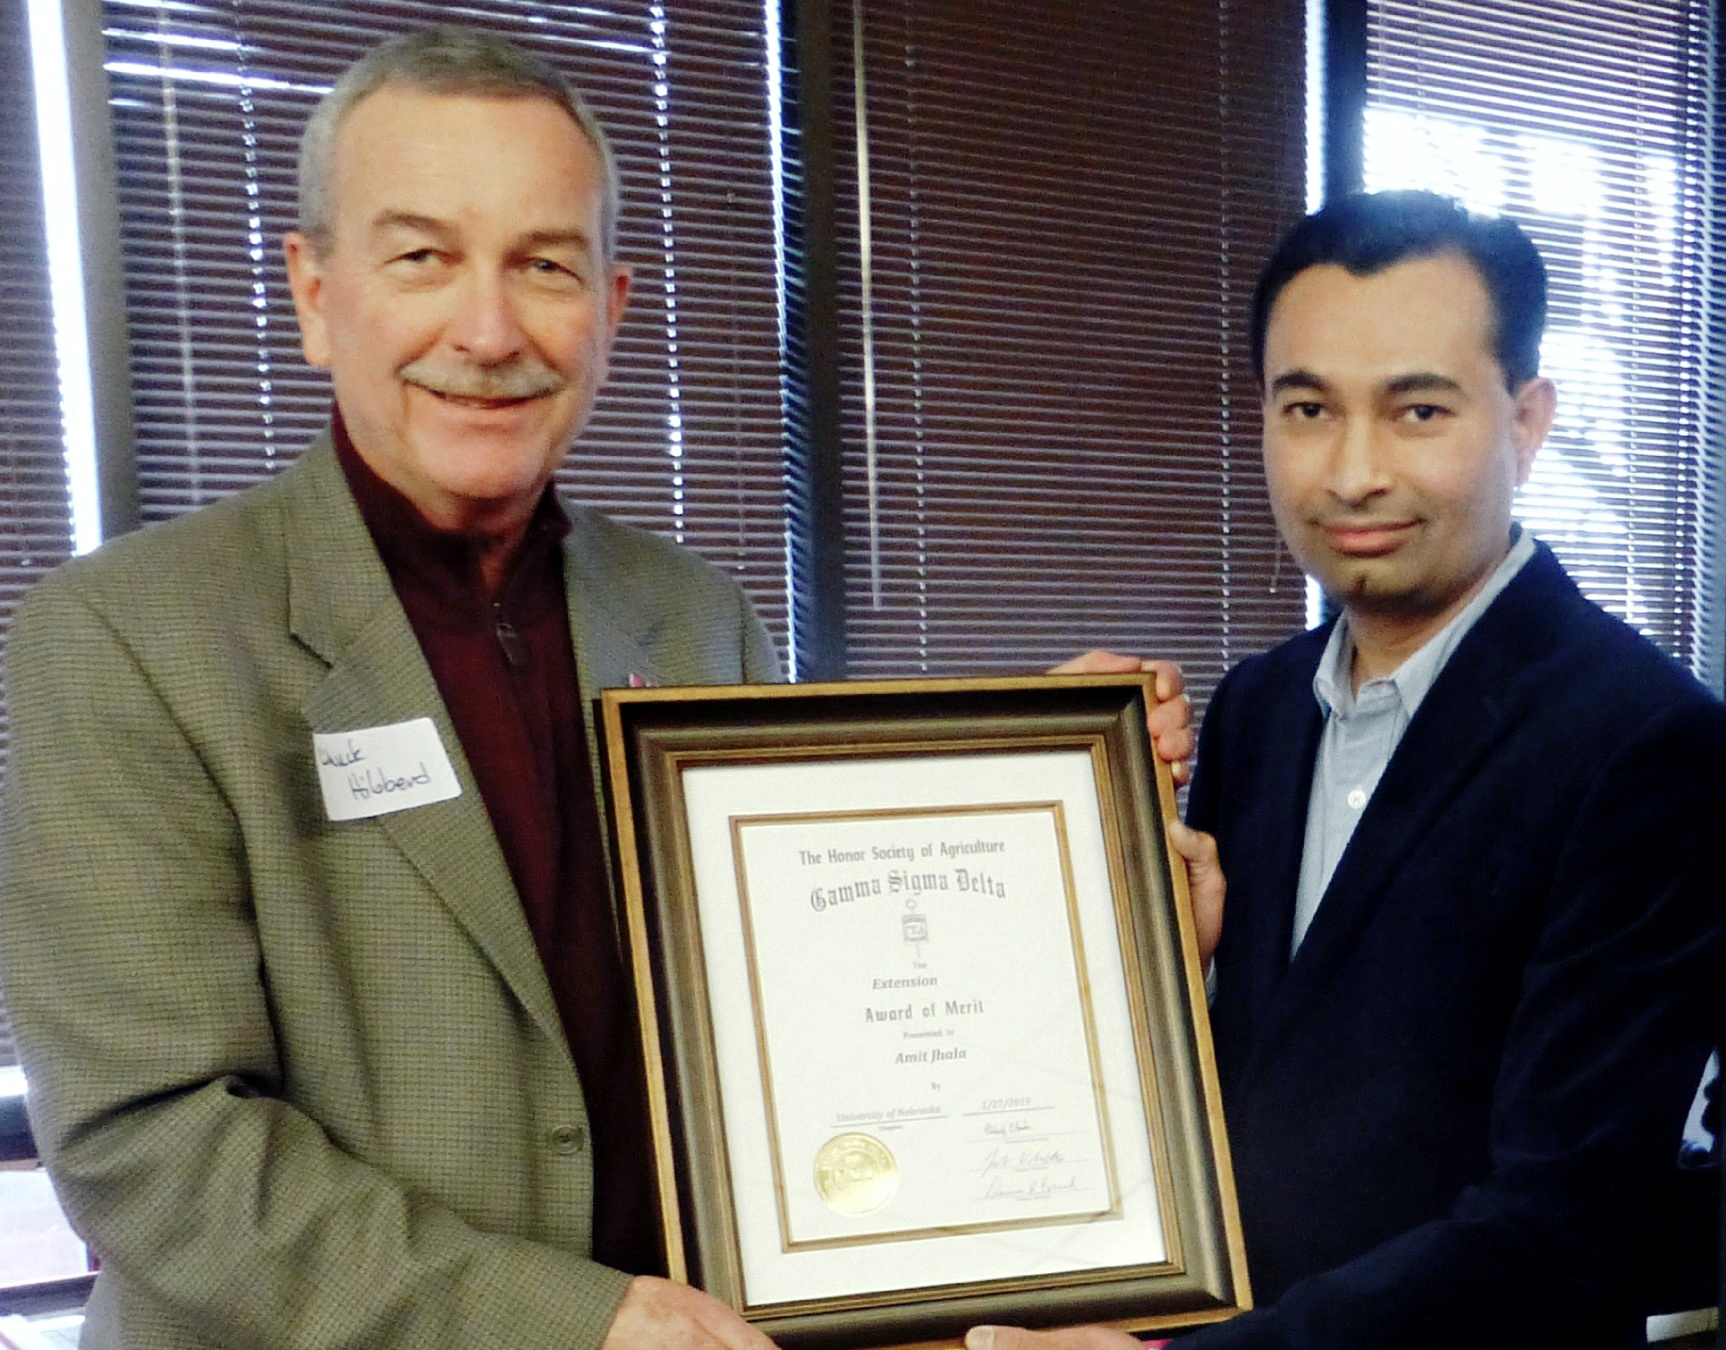 Chuck Hibberd presents The Honor Society of Agriculture Gamma Sigma Delta Extension Award of Merit to Amit Jhala Jan. 27.